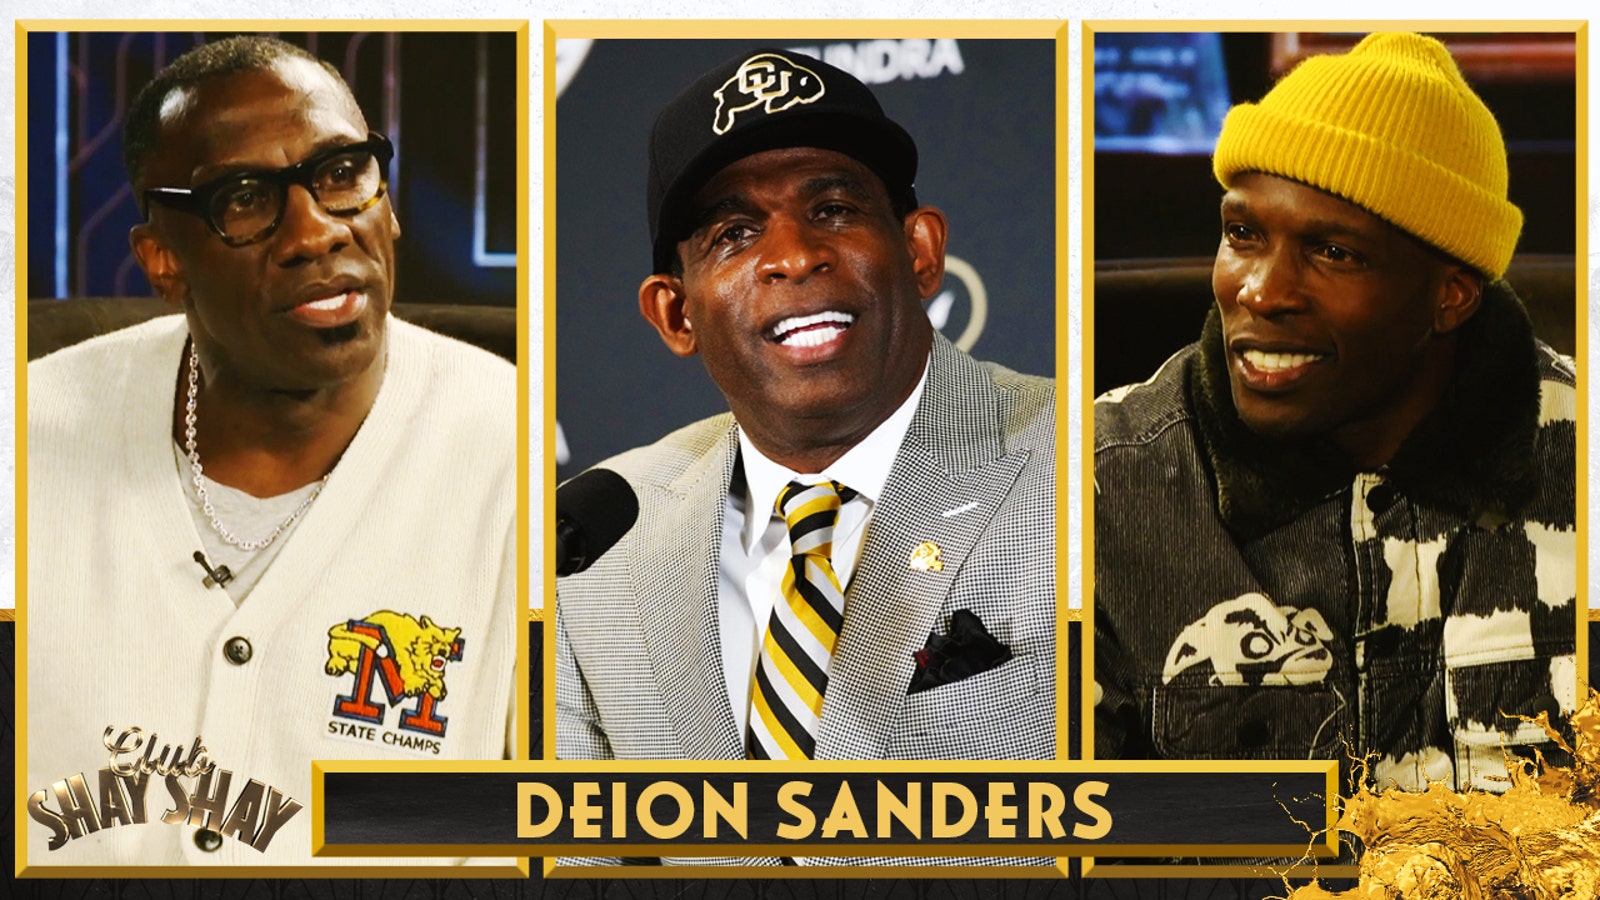 Chad Johnson believes Deion Sanders will win a National Championship then go to the NFL